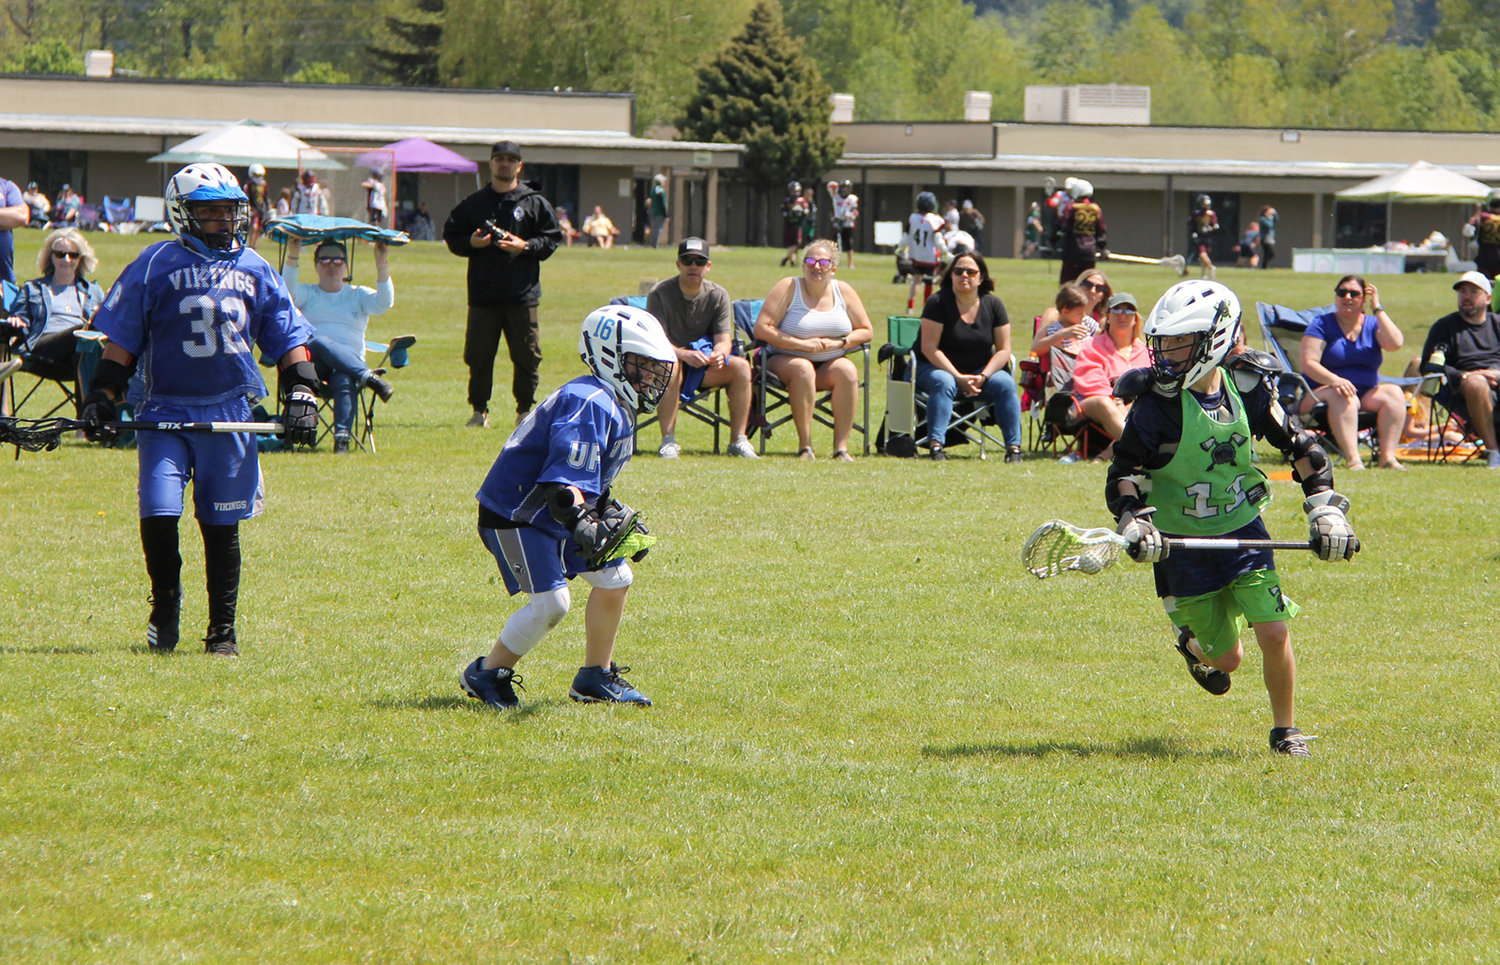 Courtesy Photo.Twin Cities Lacrosse's Easton Buck runs upfield over the weekend during the South Sound Youth Lacrosse Tournament.